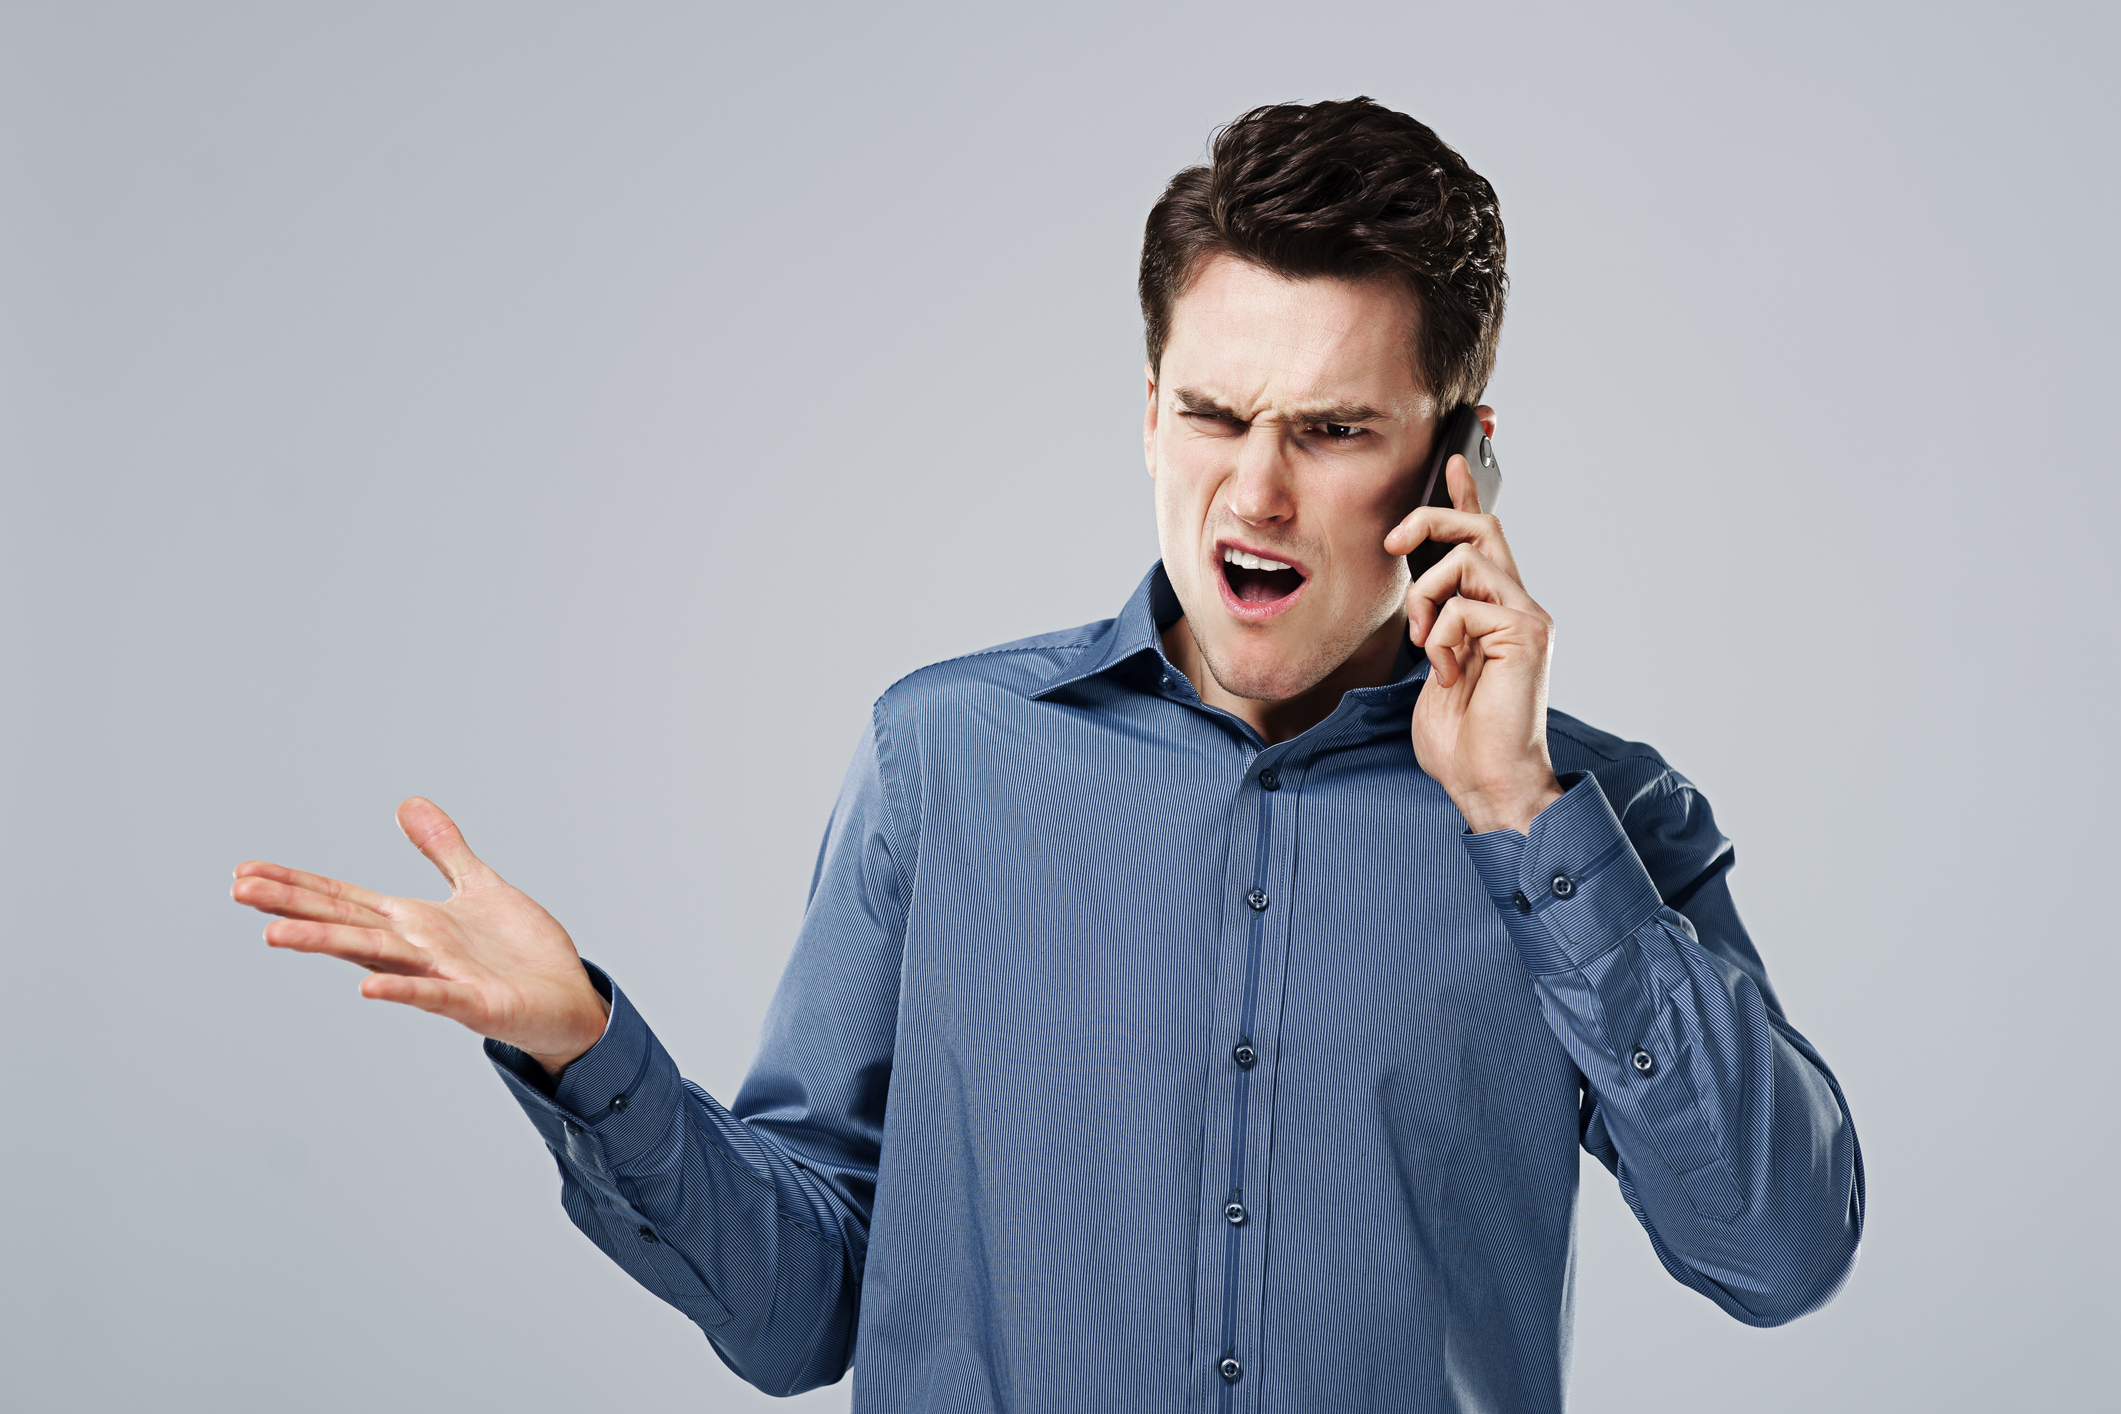 Man getting angry on the phone | Source: Getty Images